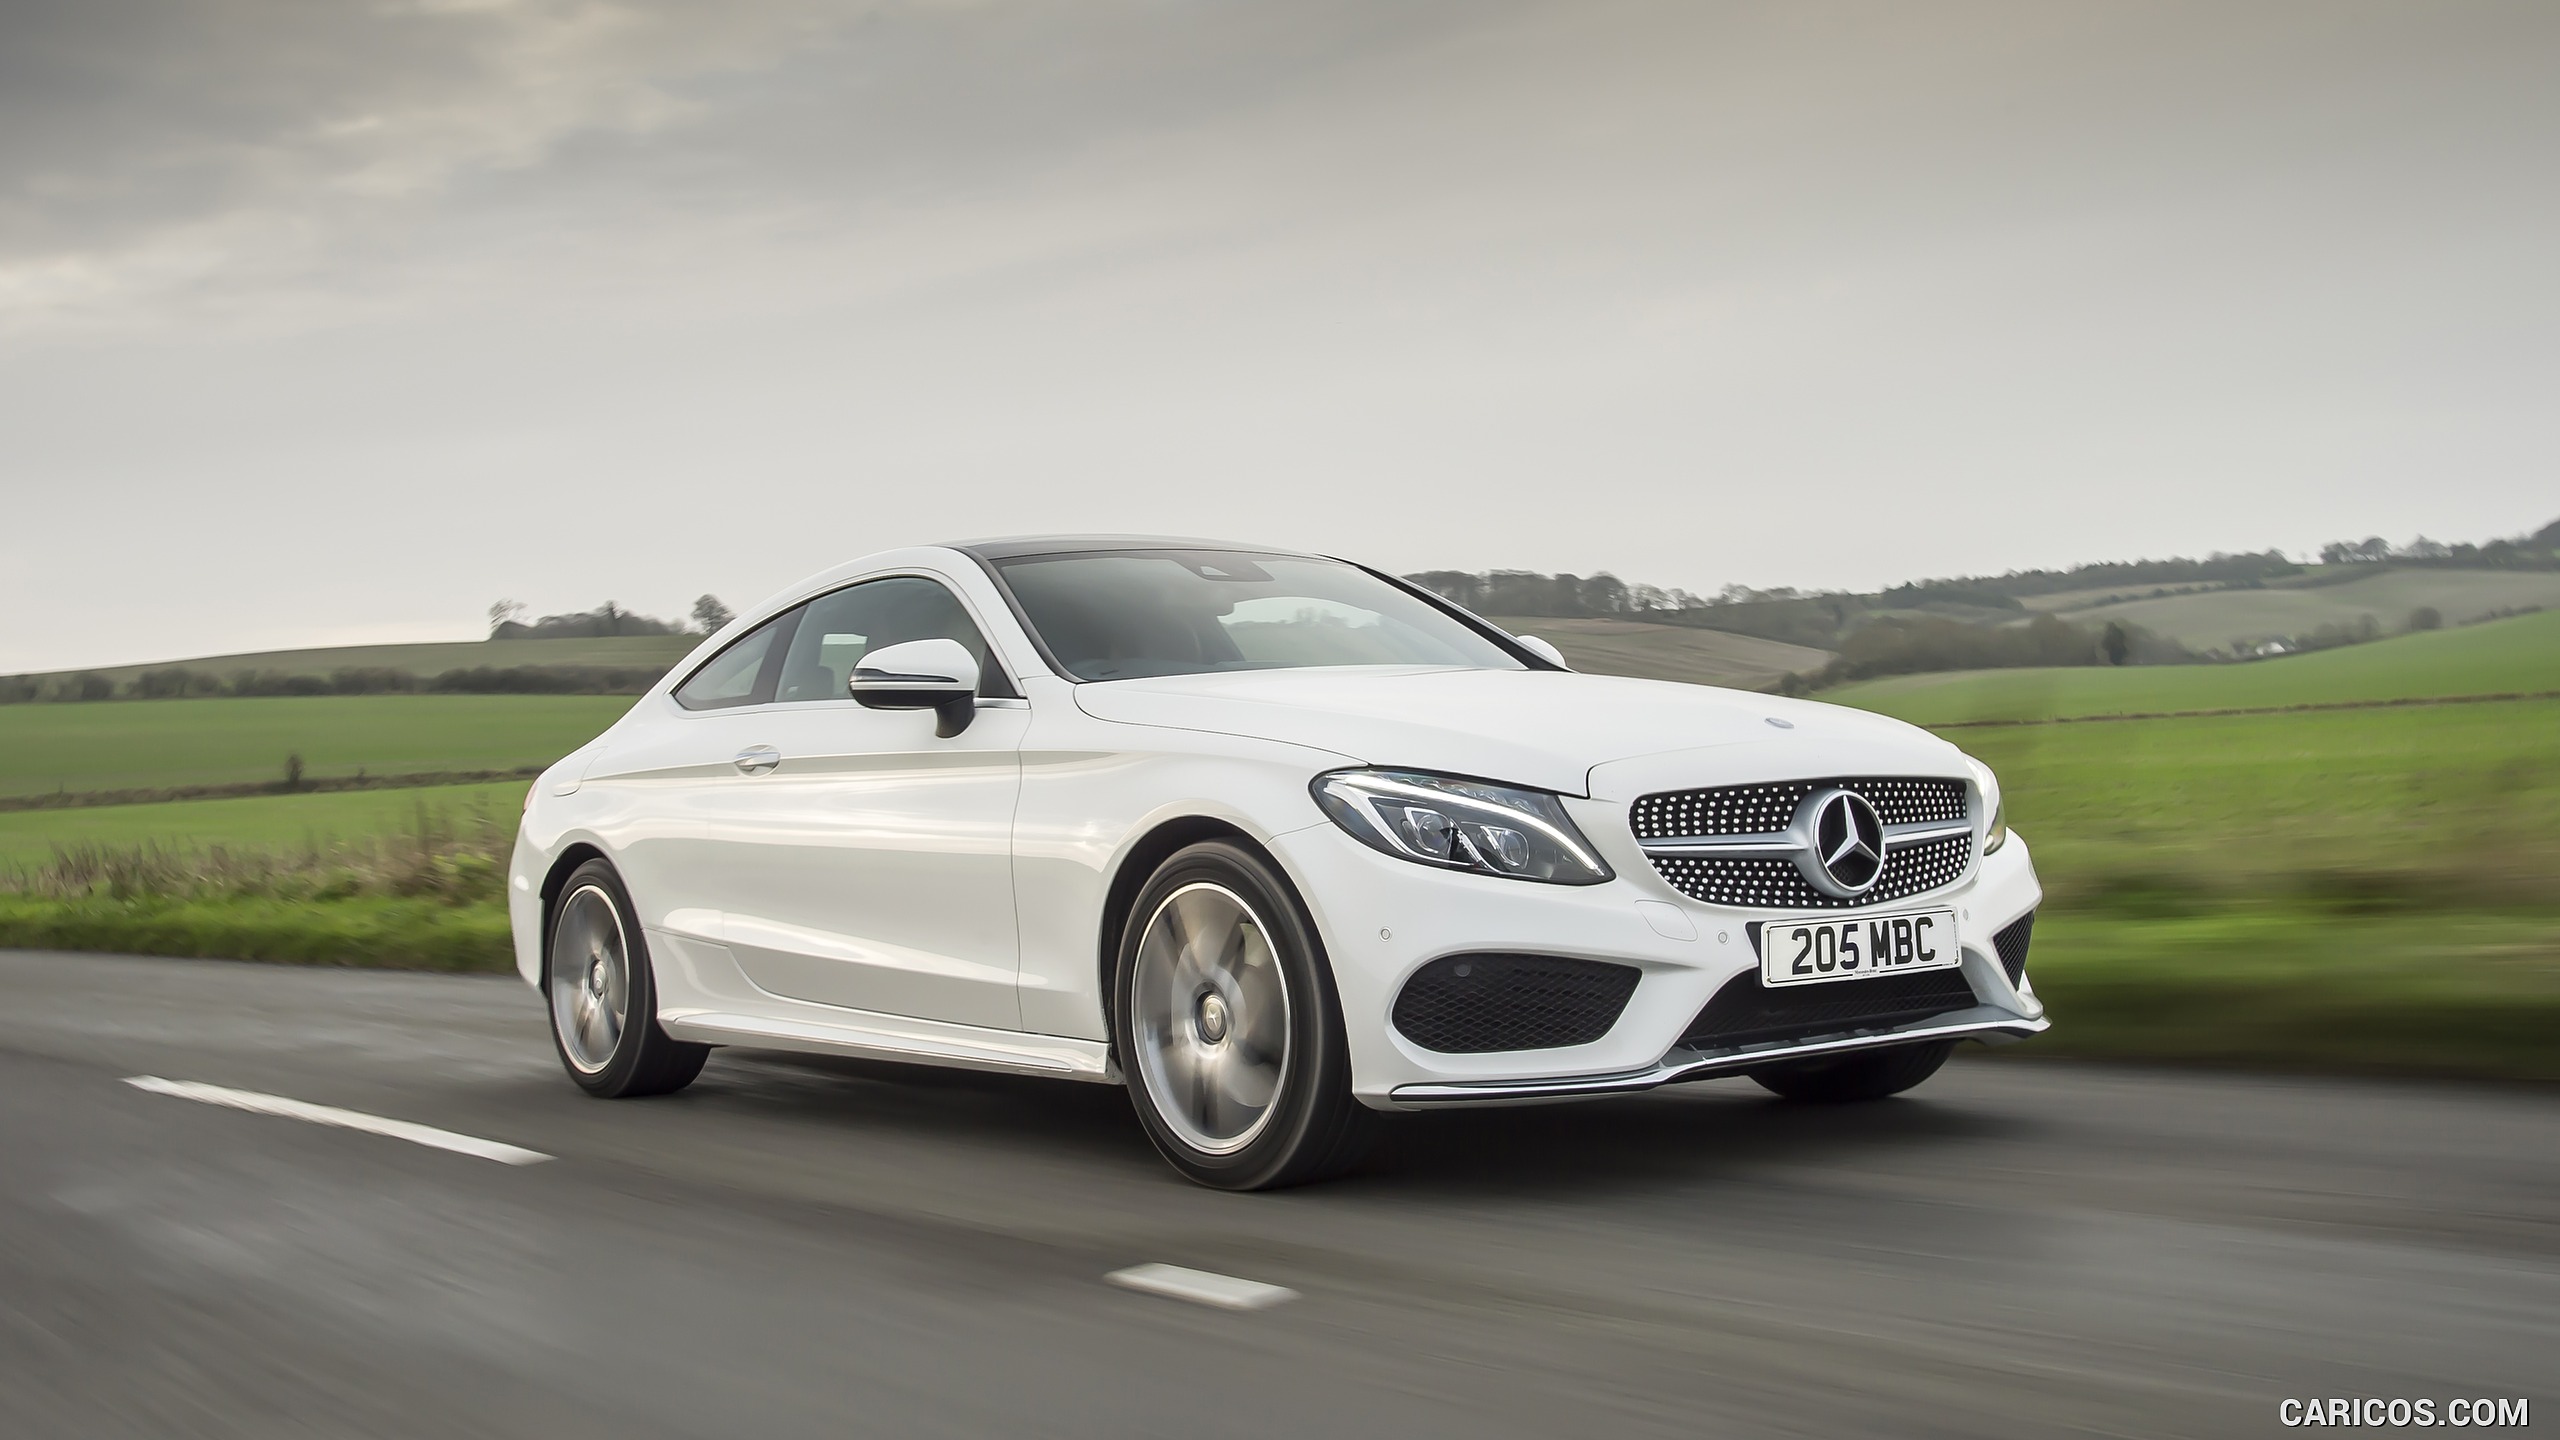 2017 Mercedes-Benz C-Class Coupe (UK-Spec) - Front, #129 of 210